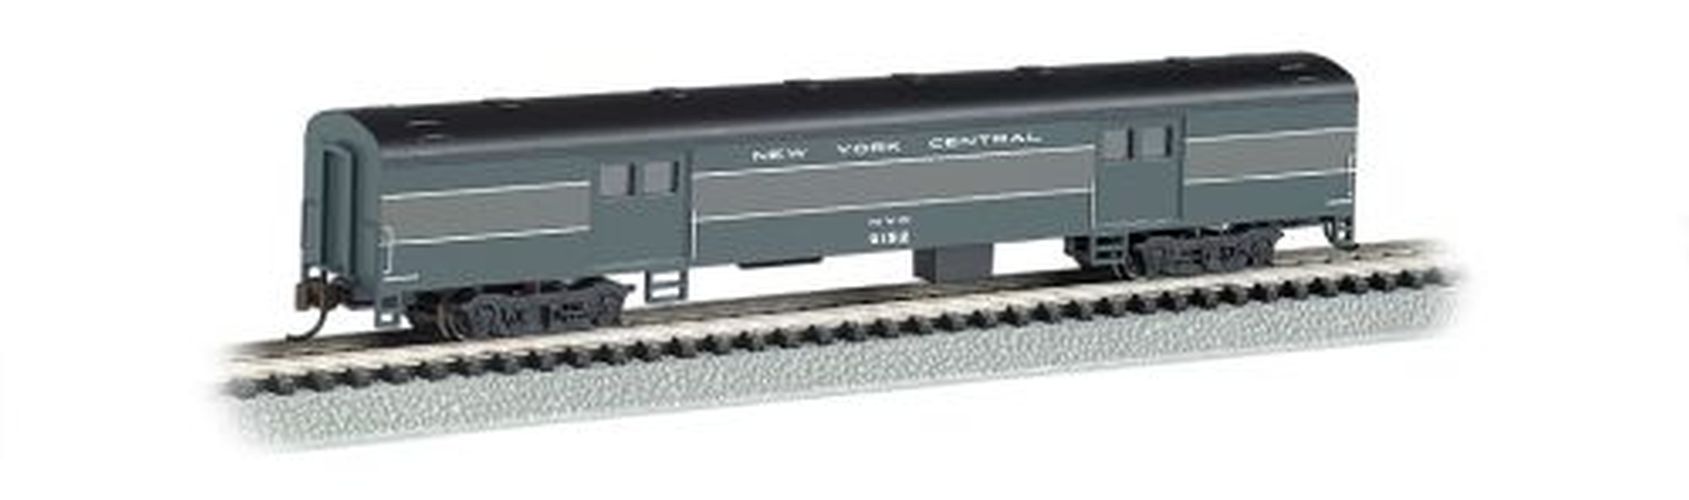 BACHMANN New York Central N Scale 72 Smooth Side Baggage Car - 